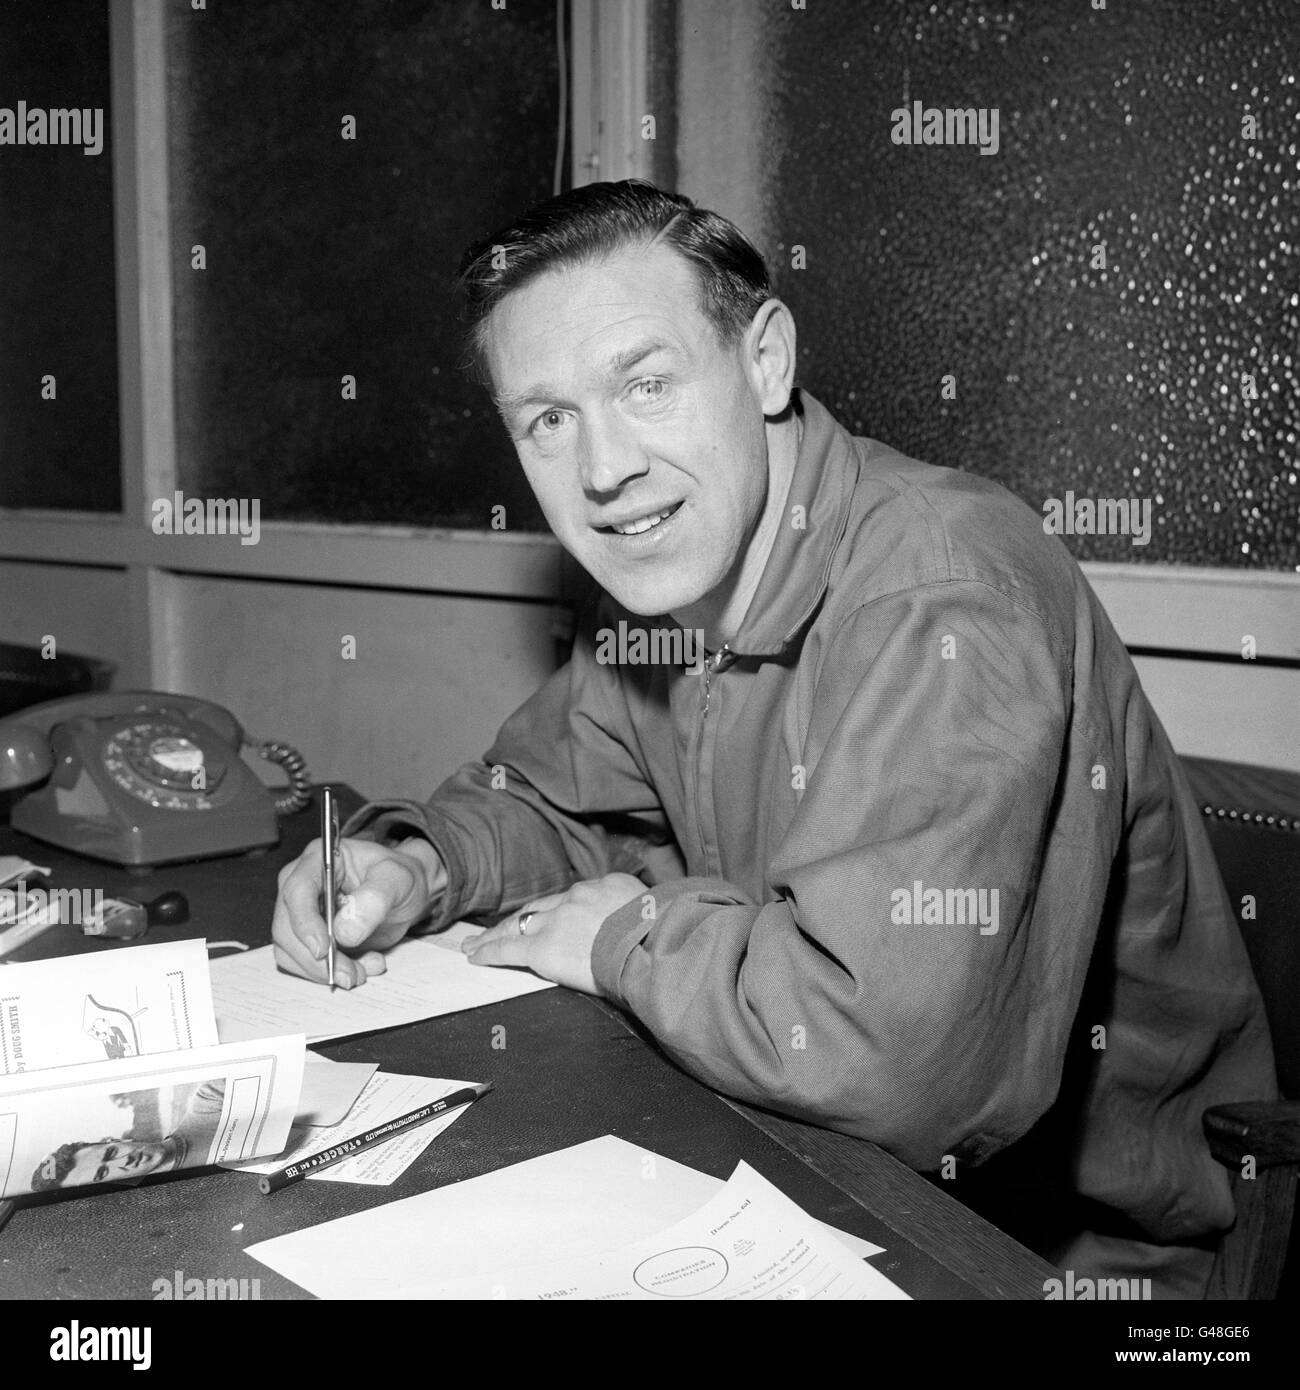 Soccer - League Division Three - Millwall Photocall - The Den. Billy Gray, former Burnley, Chelsea and Nottingham Forest player, who is now player manager of Millwall FC. Stock Photo